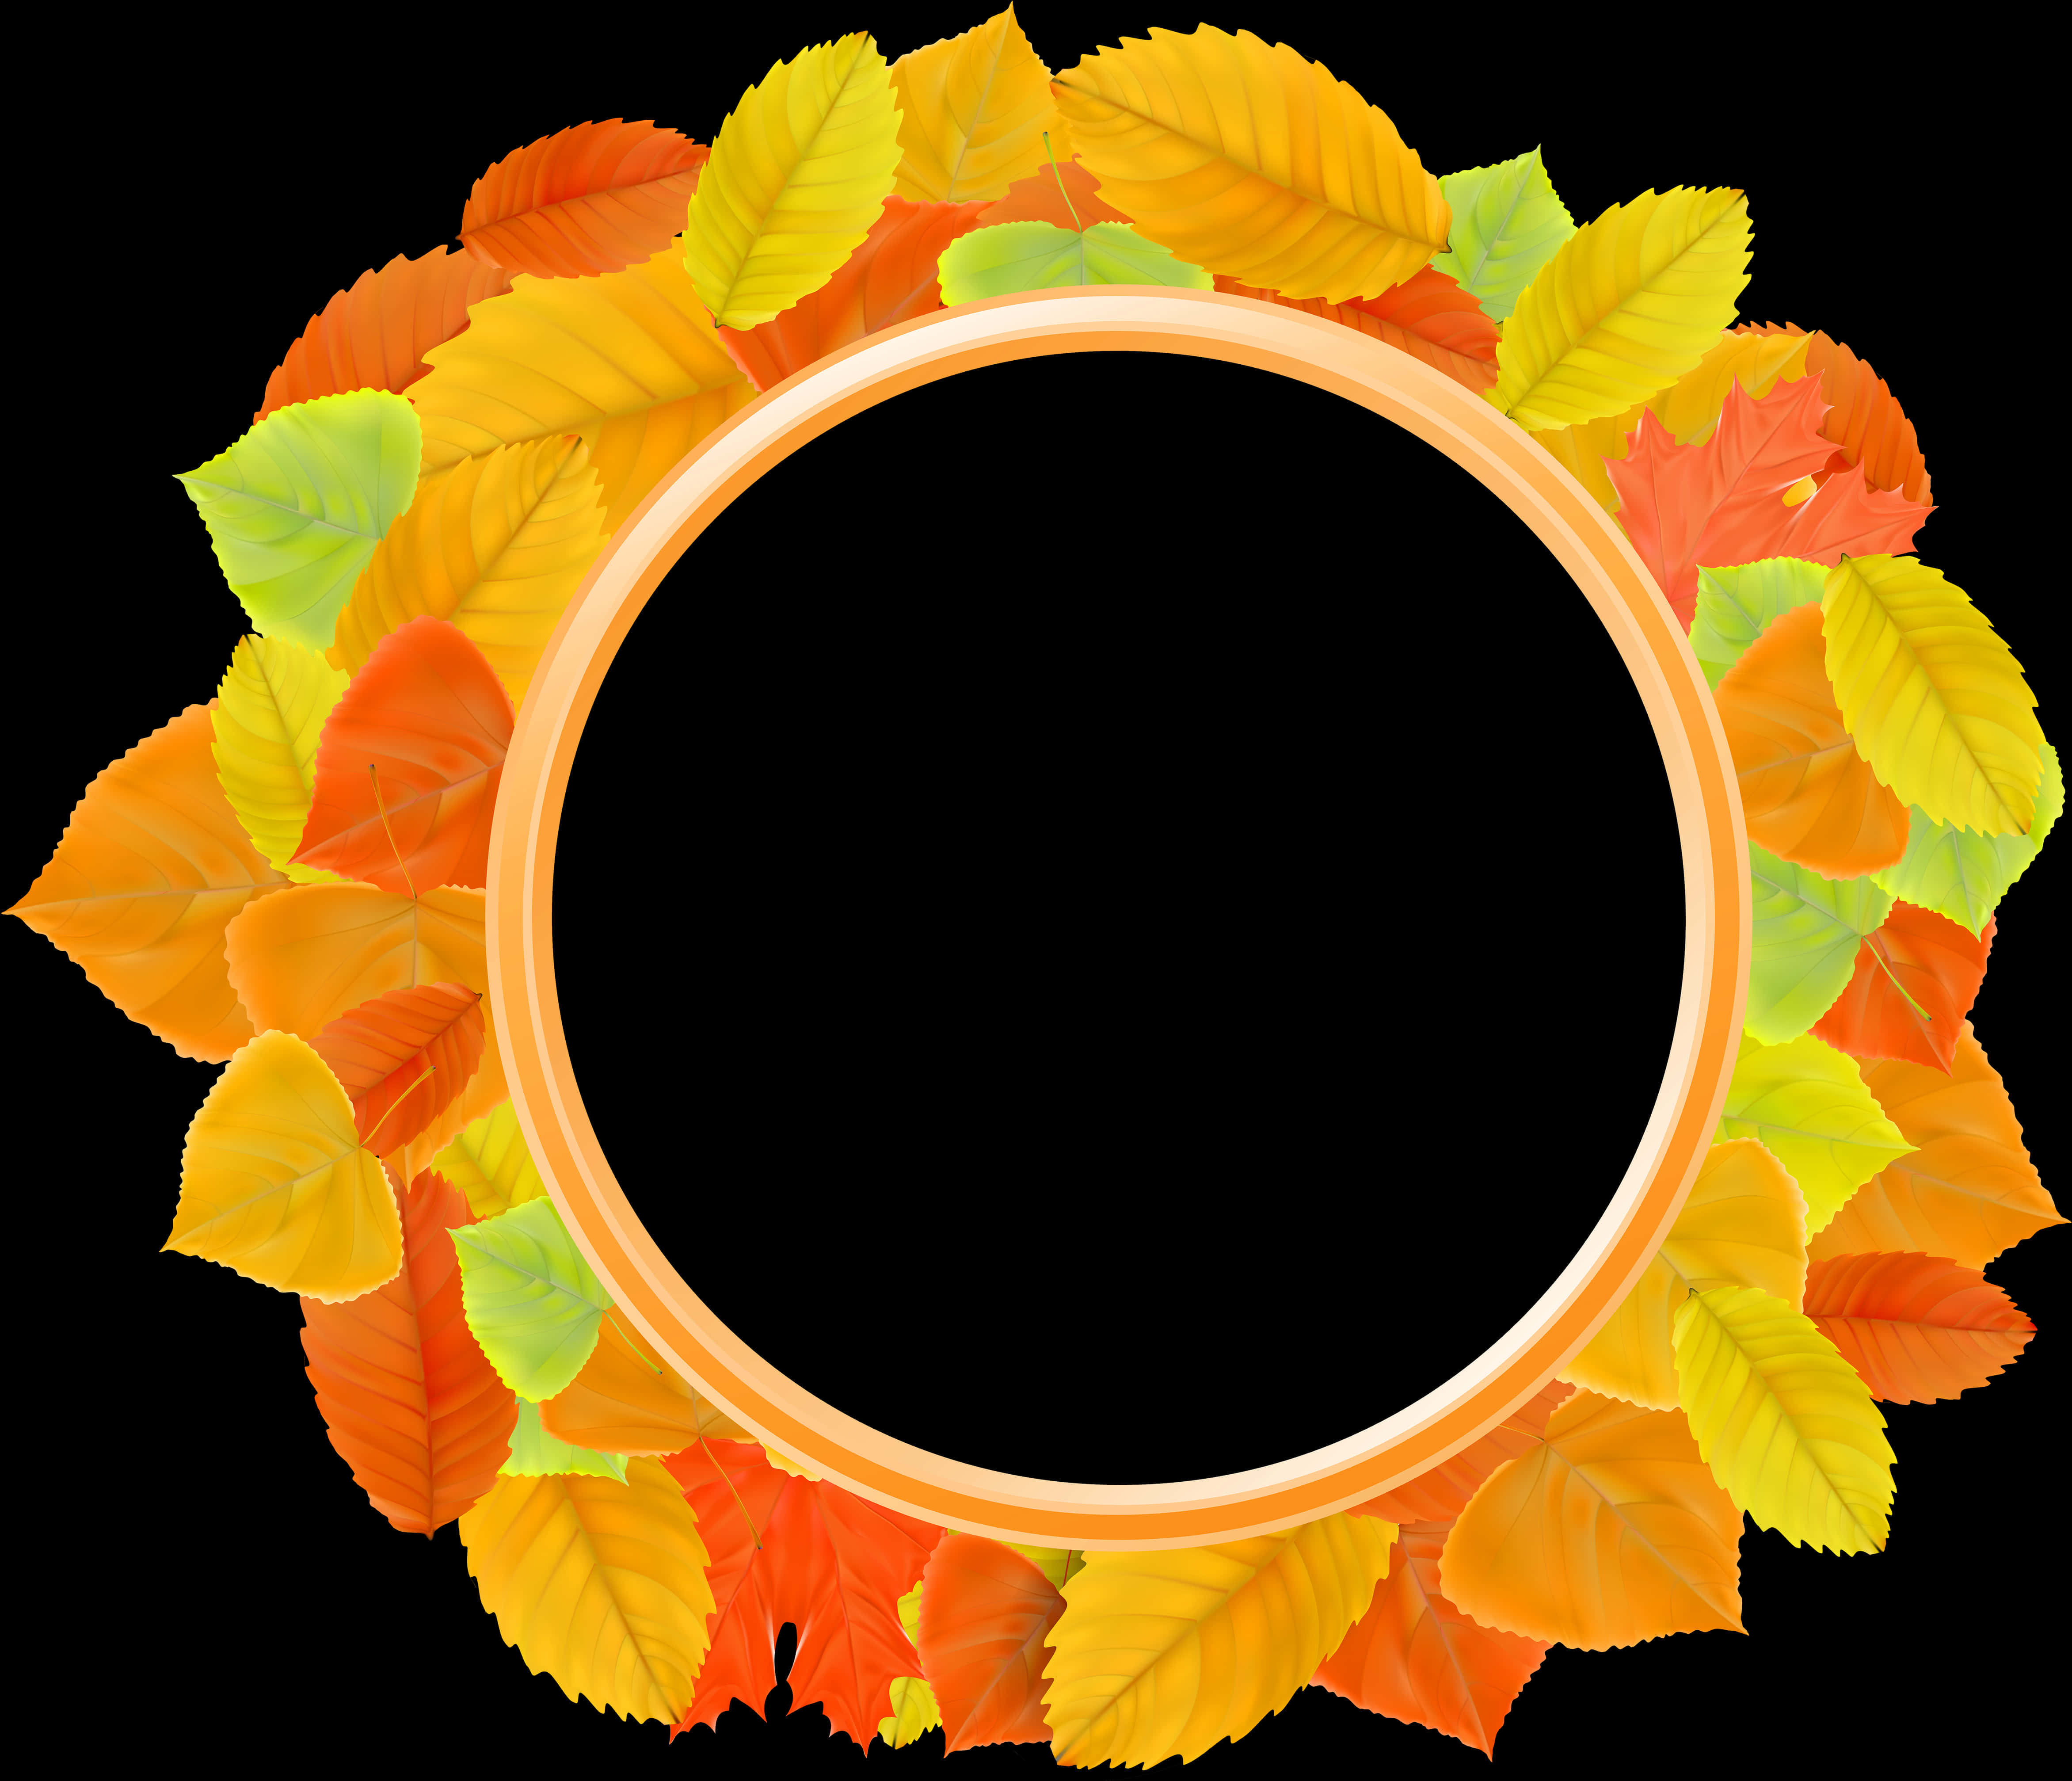 A Circle With Leaves Around It